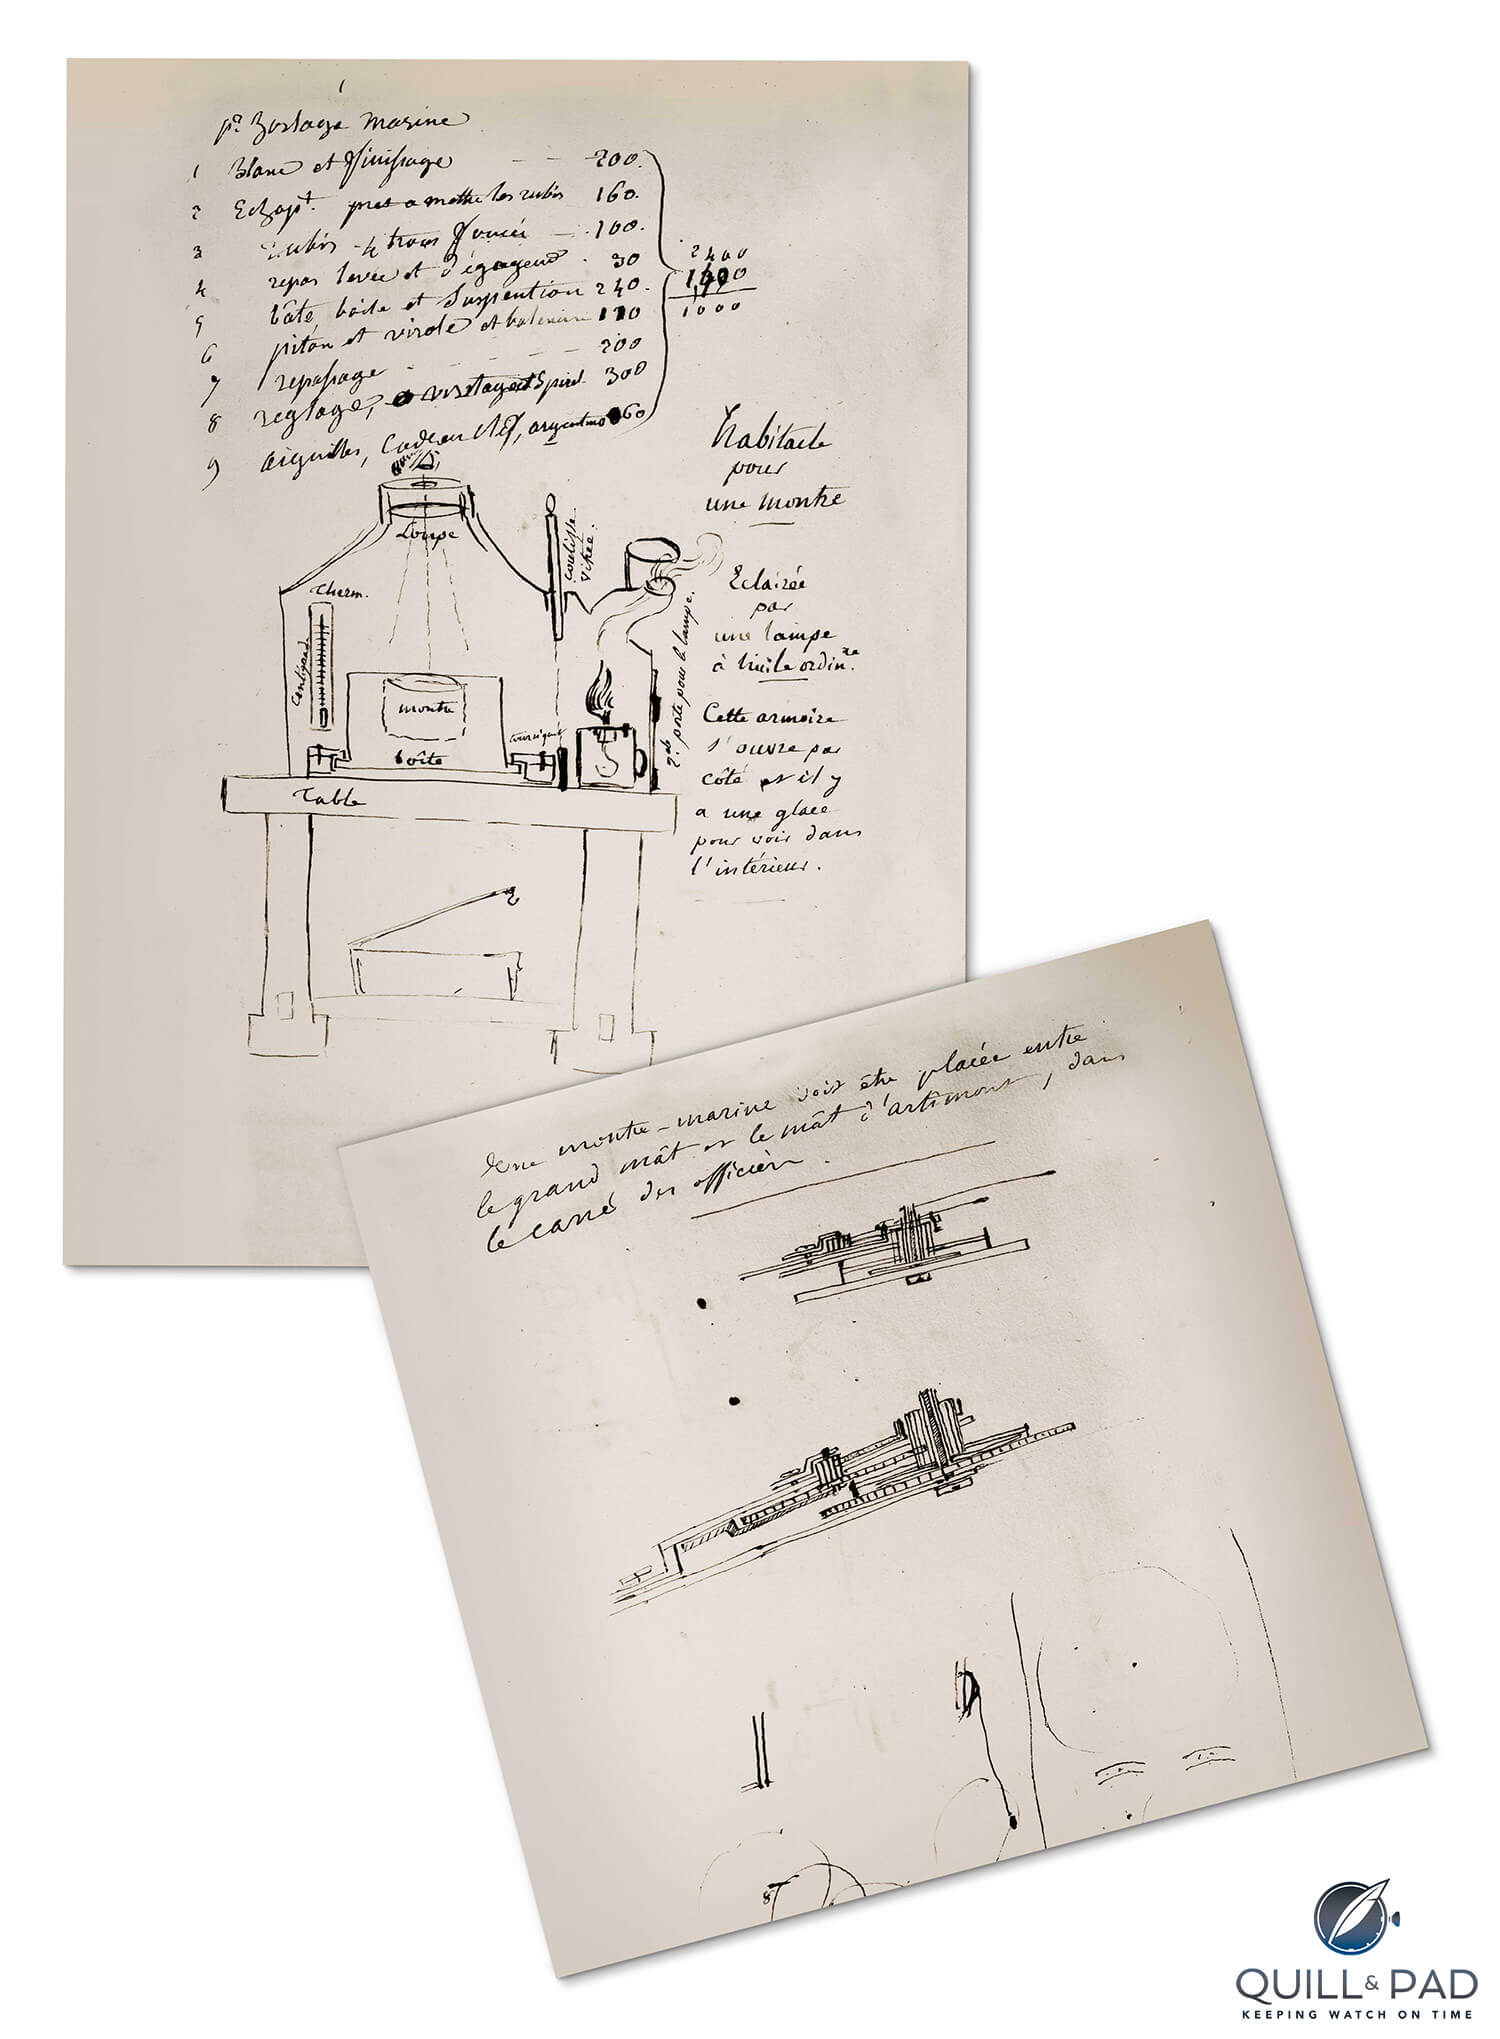 Sketches by A-L Breguet illustrating the installation of a marine chronometer aboard a ship